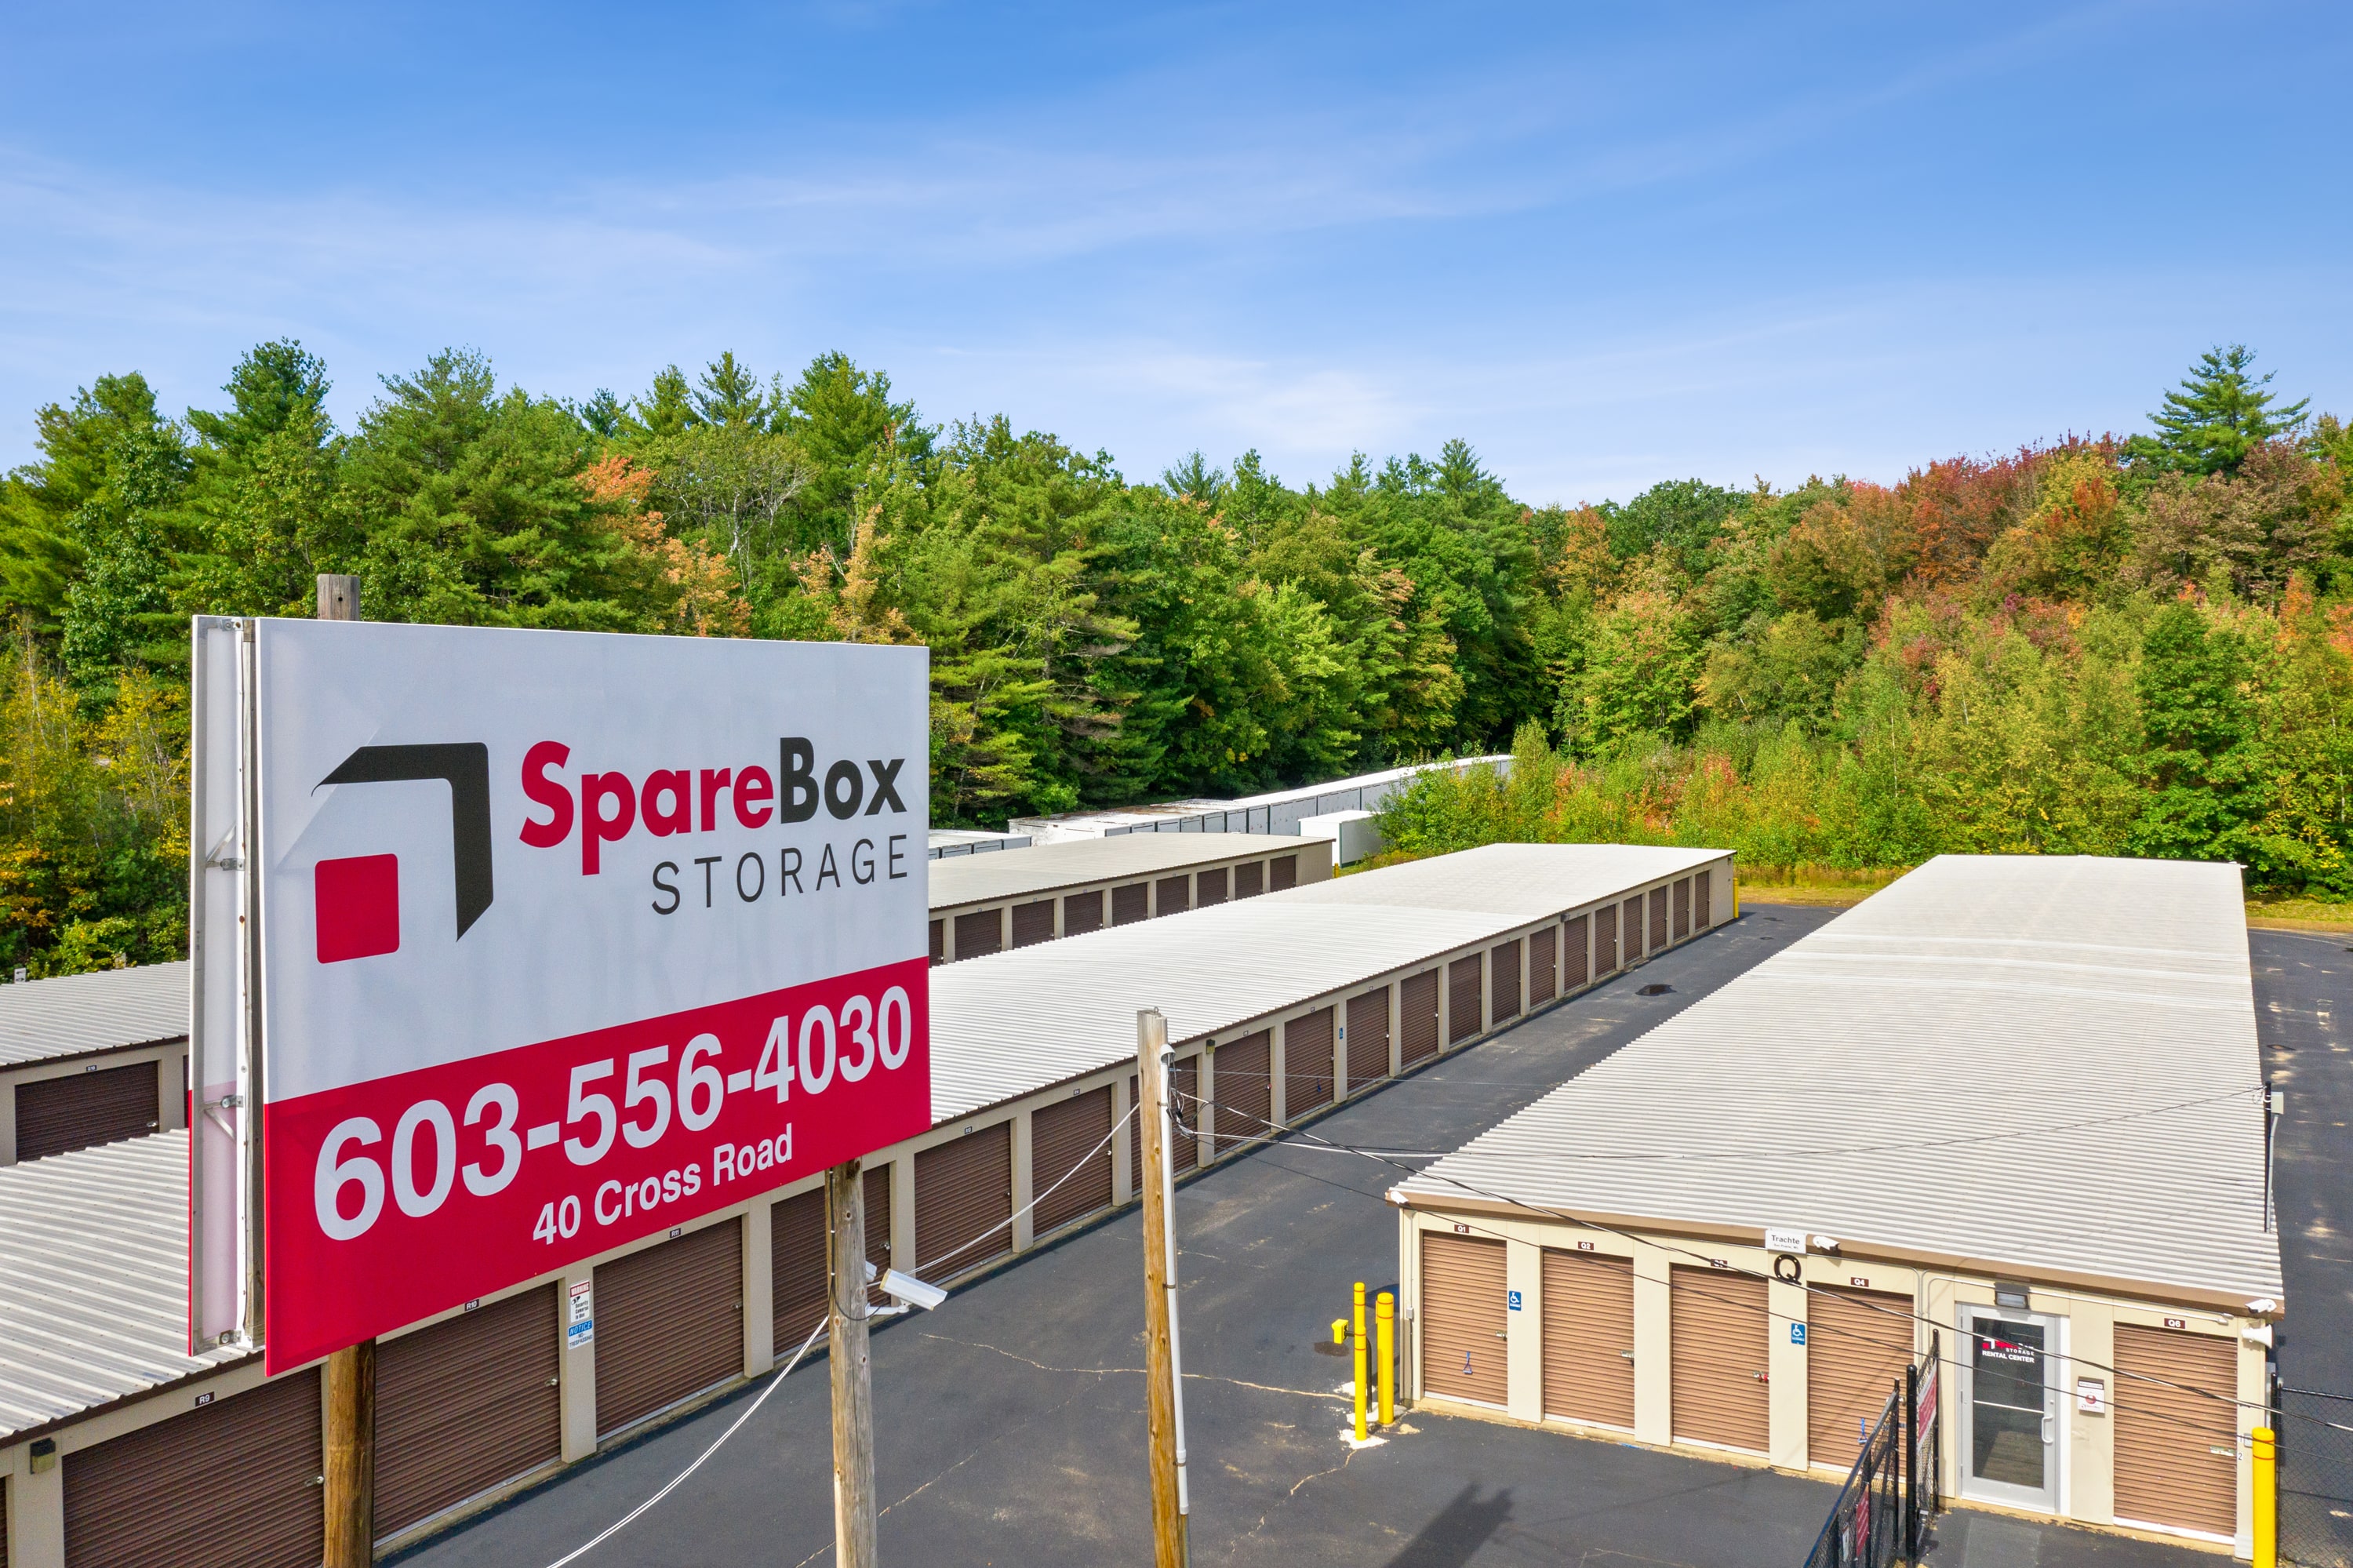 SpareBox Storage has storage in Rochester, NH, that’s easy to access from New Hampshire or Maine | SpareBox Storage